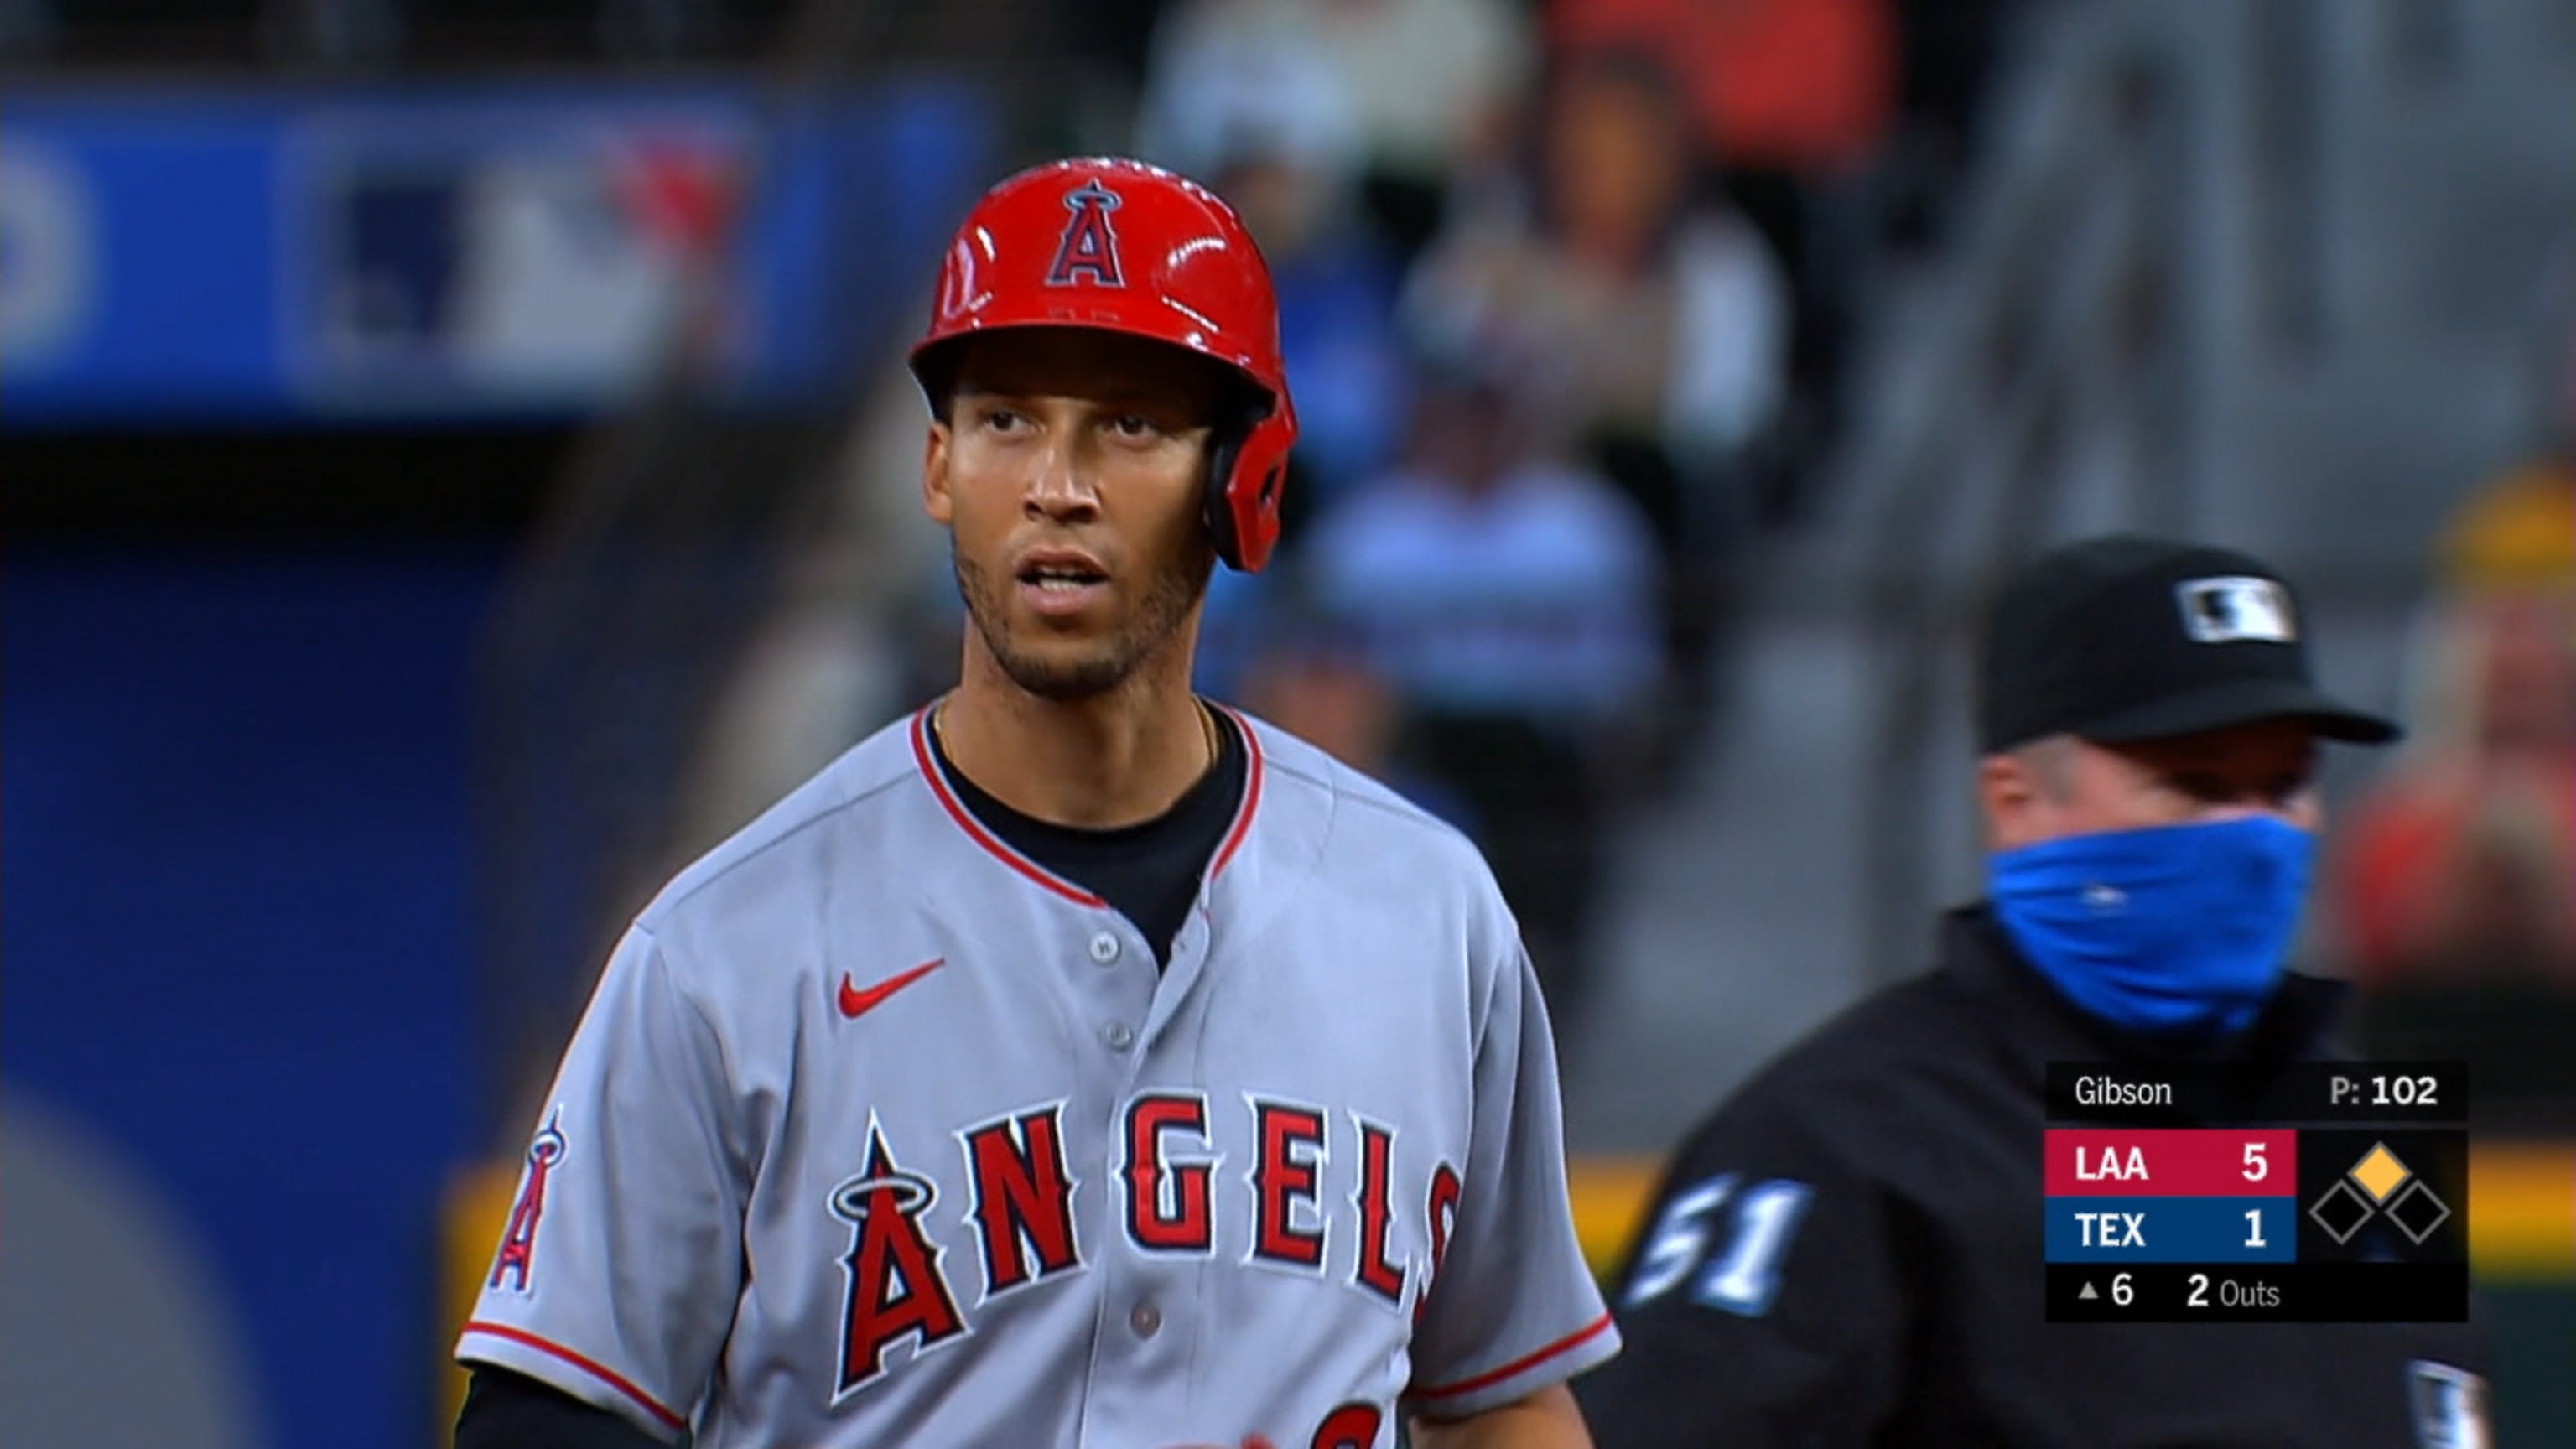 Andrelton Simmons Los Angeles Angels Baseball Player Jersey